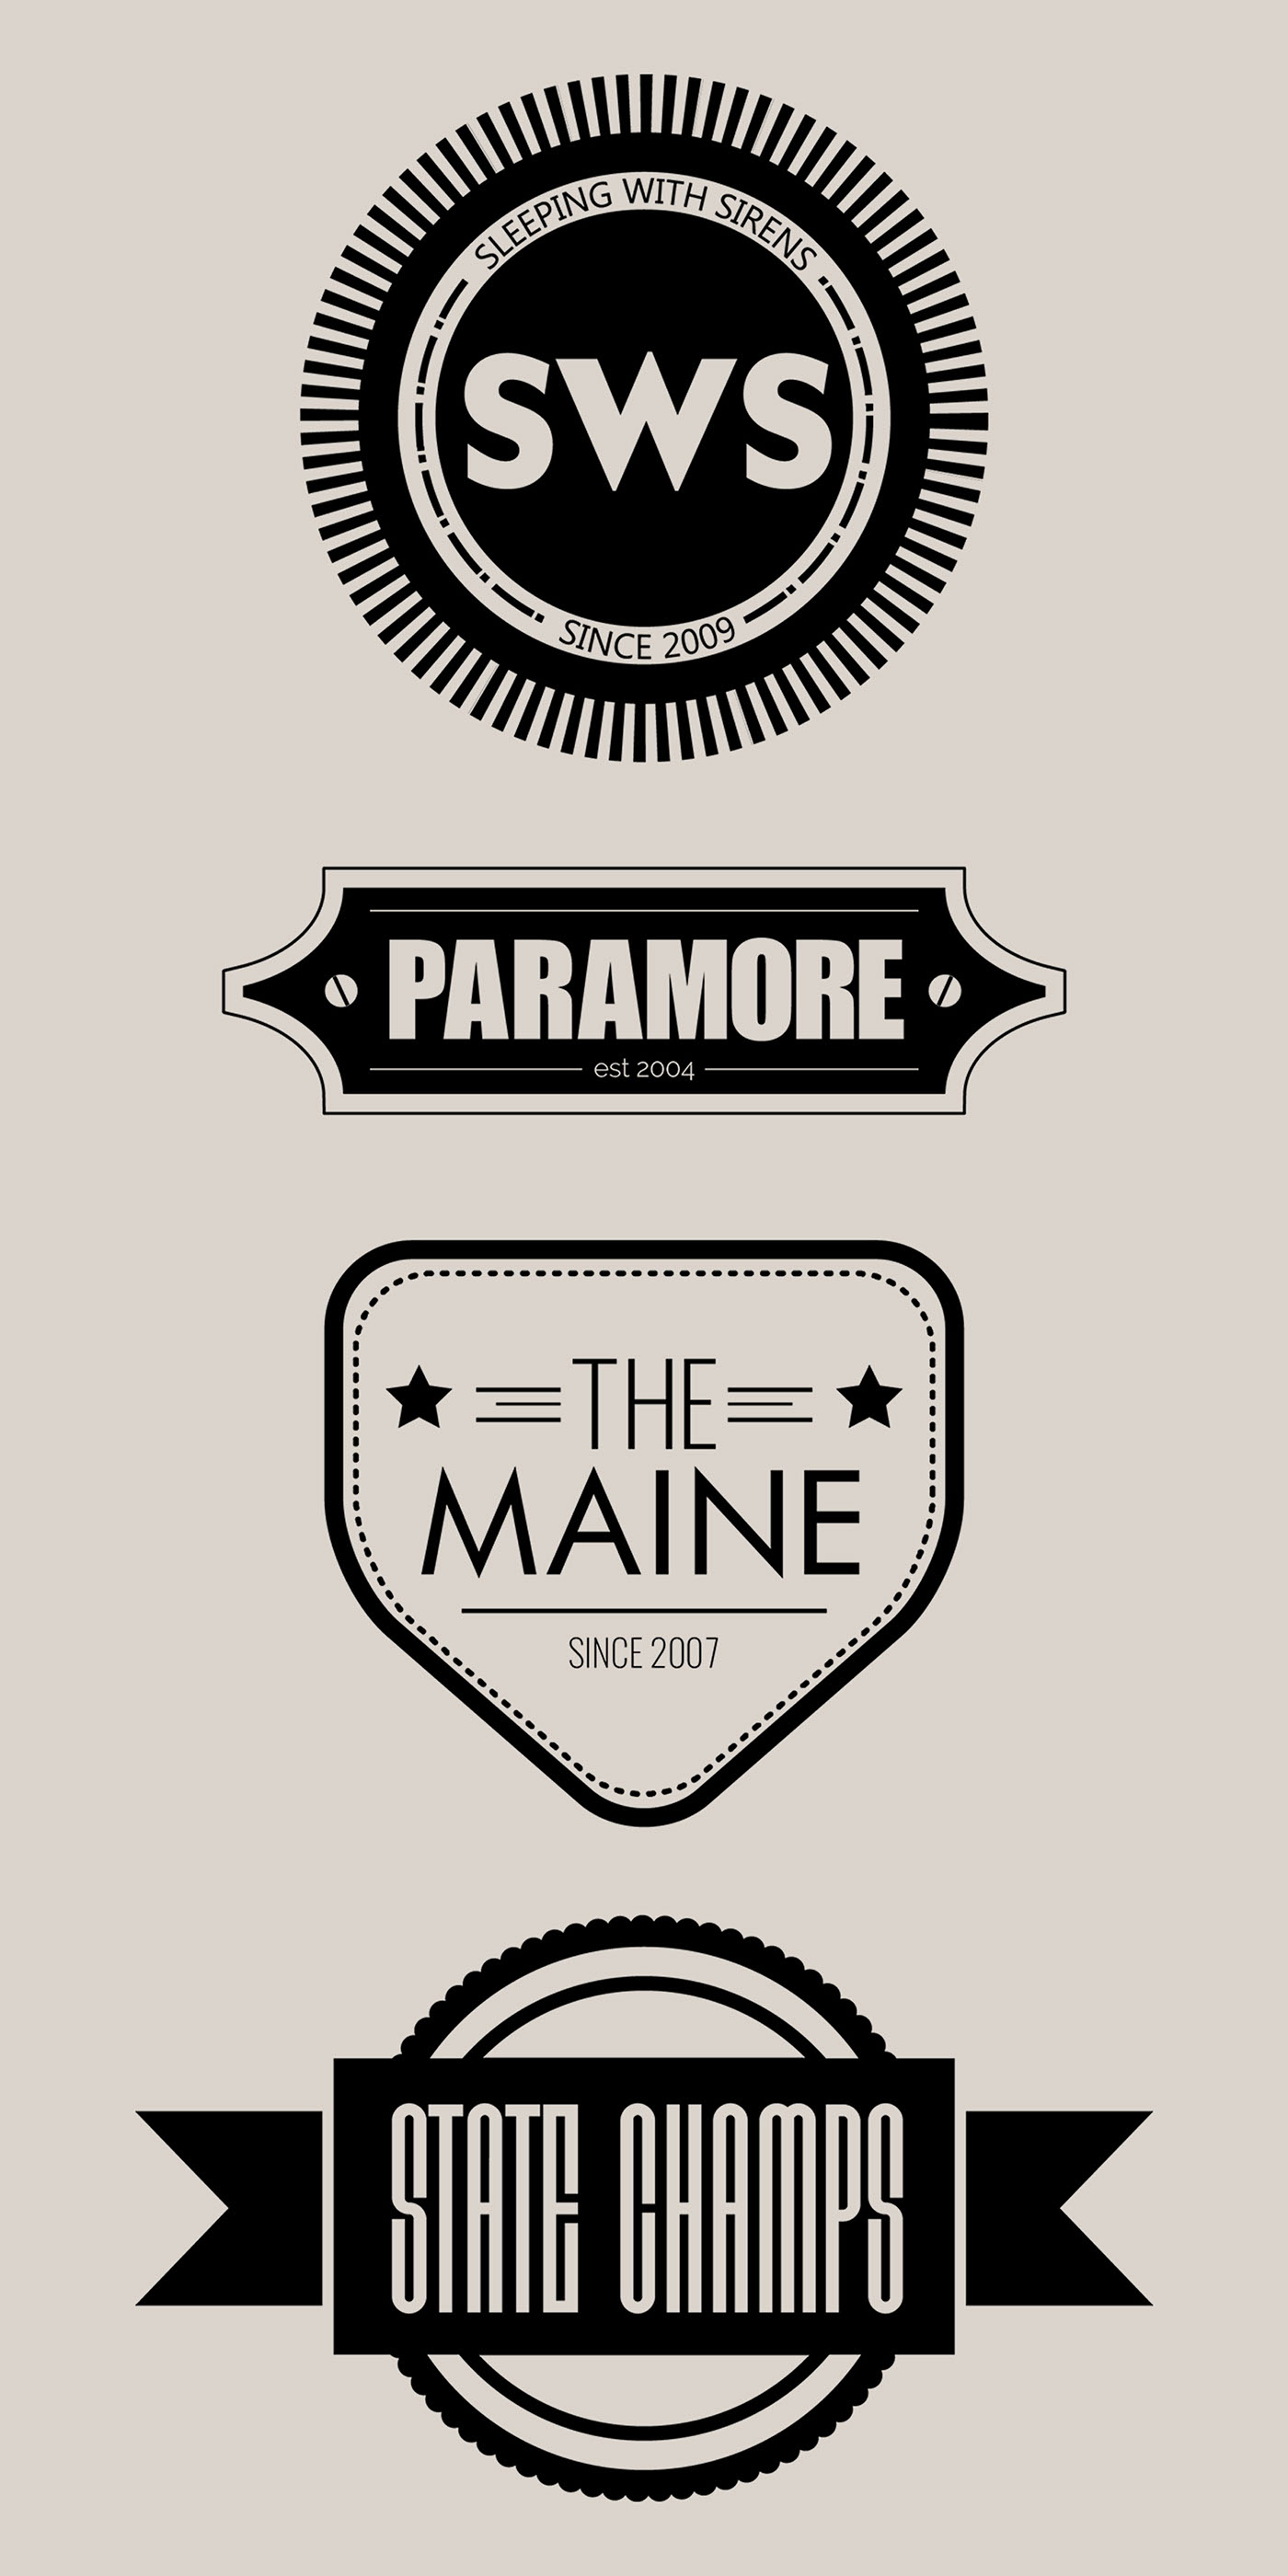 Retro vintage badges SWS paramore the maine State Champs music